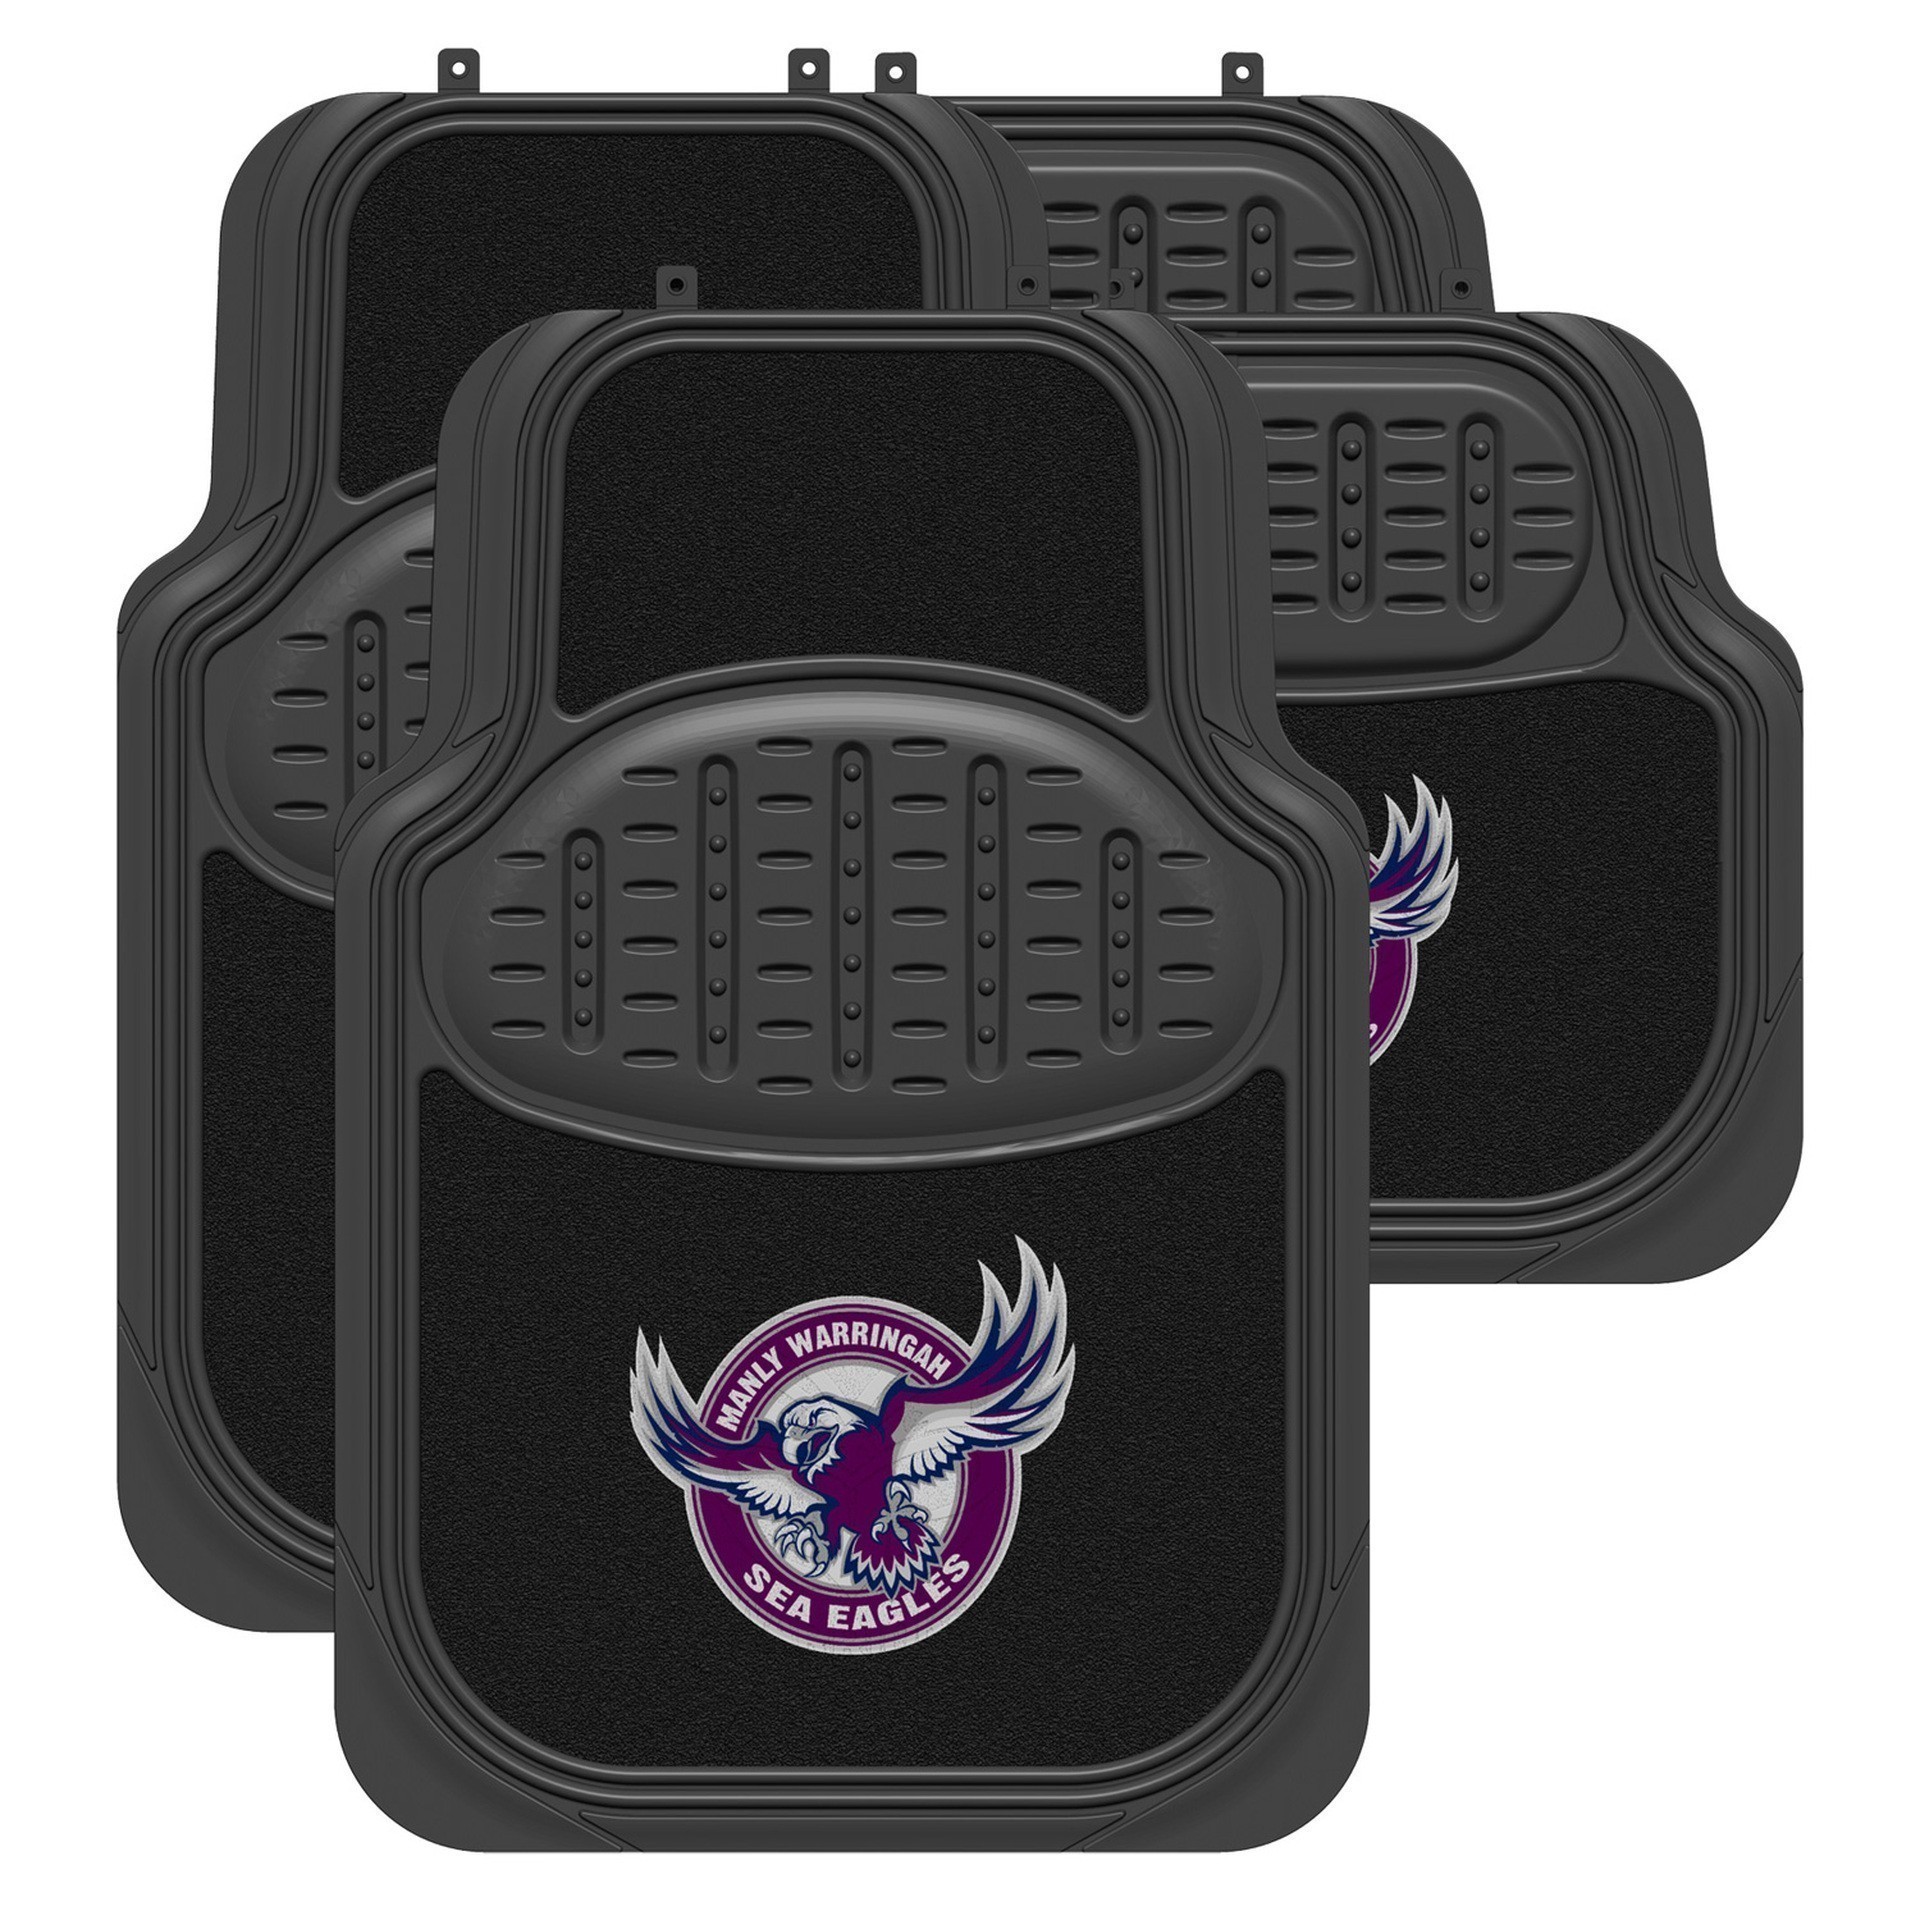 NRL MANLY SEA EAGLES car floor mats - SET OF 4 *FREE SHIPPING*